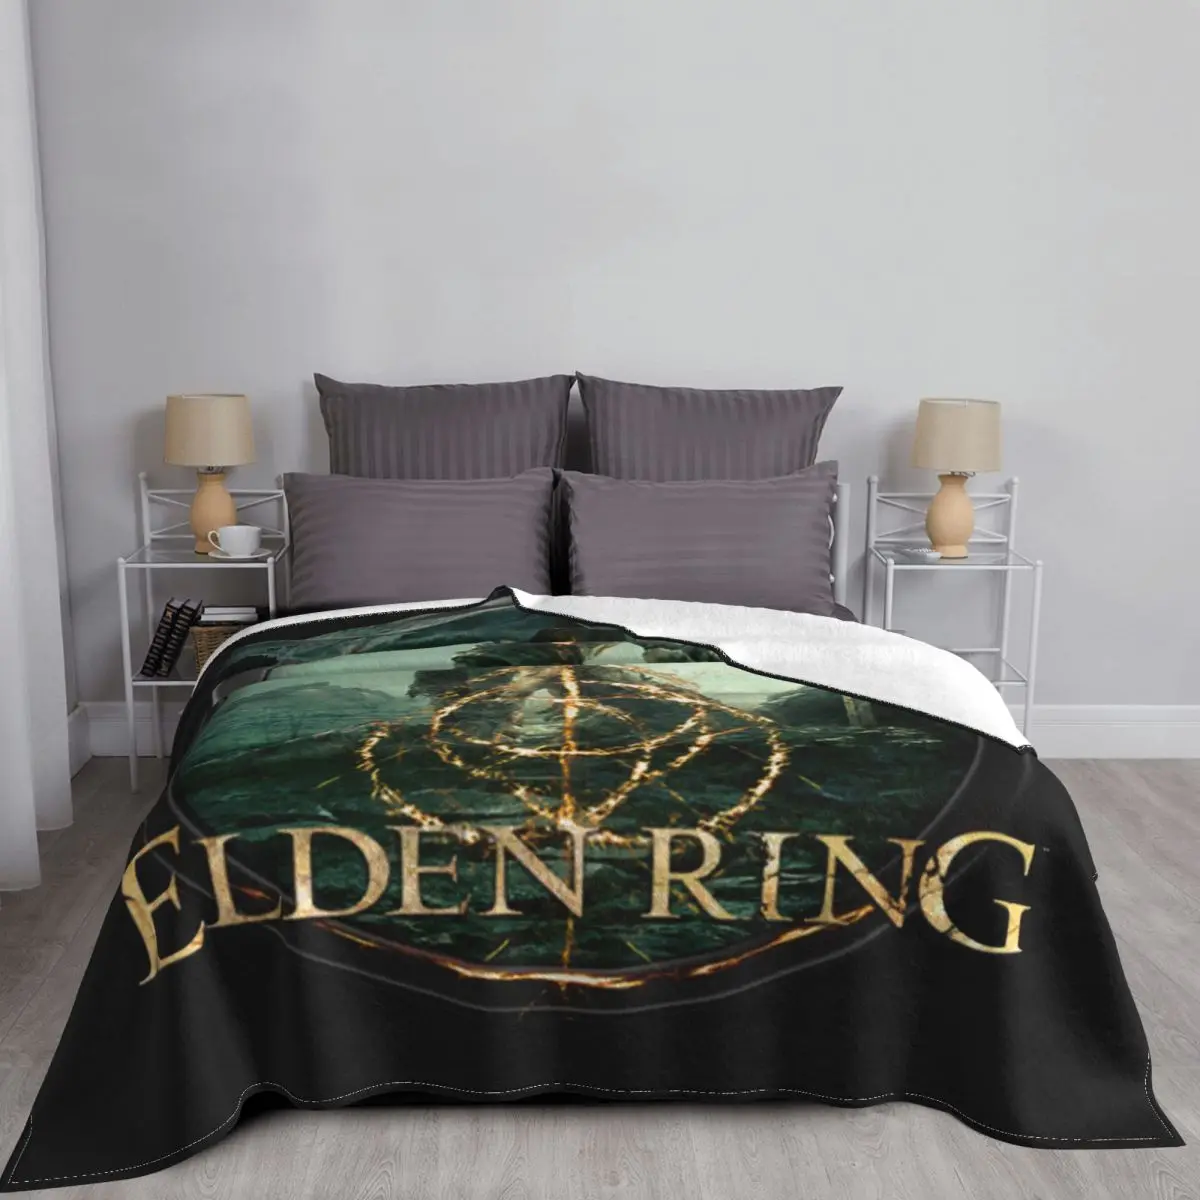 

Elden Ring Knitted Blankets Fleece Undead Knight Dark Souls Games Super Soft Throw Blankets for Bedding Couch Bedroom Quilt